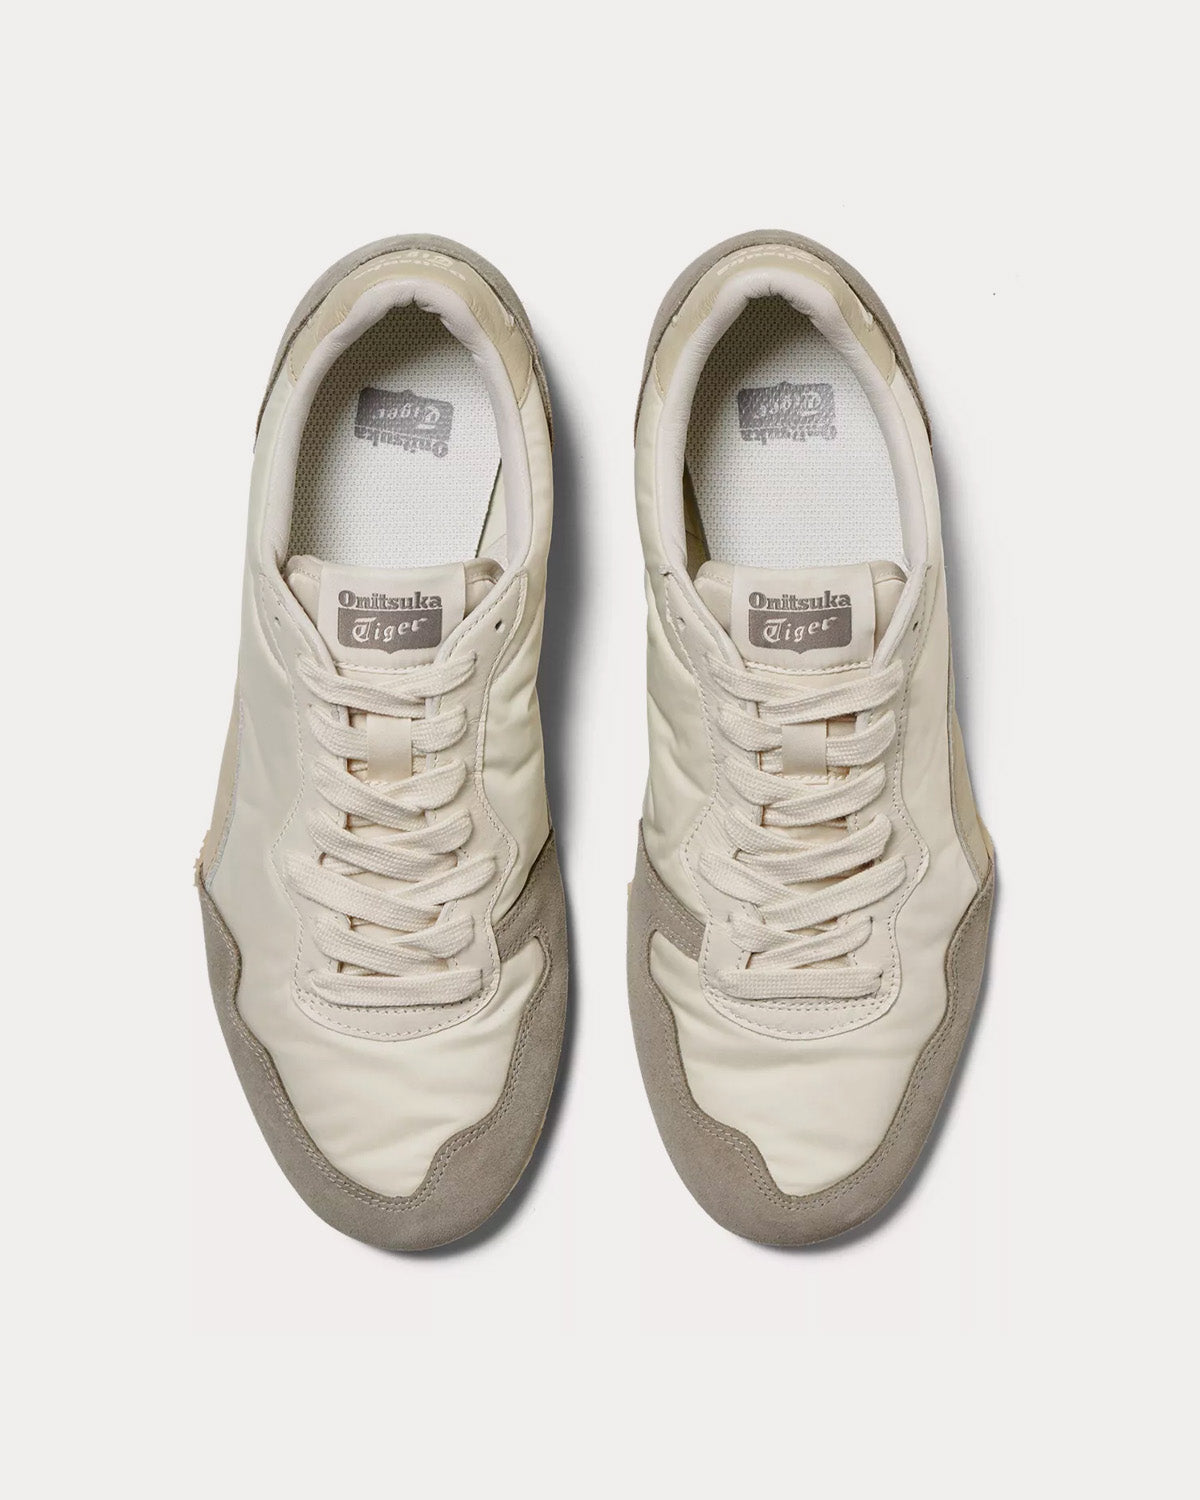 Onitsuka Tiger - Serrano CL Cream / Putty Low Top Sneakers